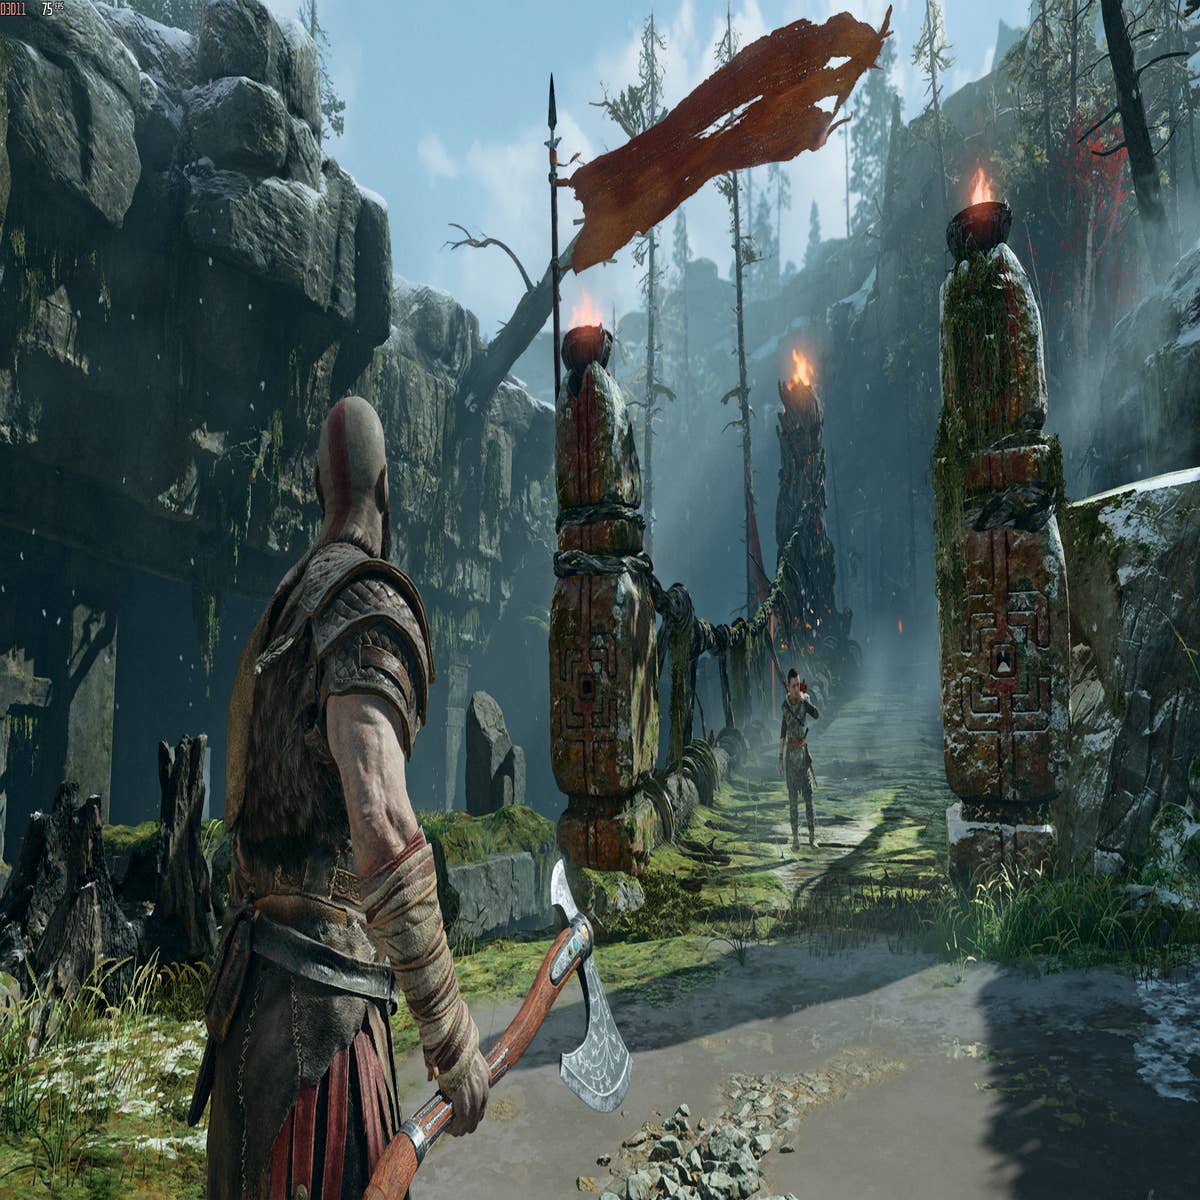 God of War PC: here are the recommended specs and features